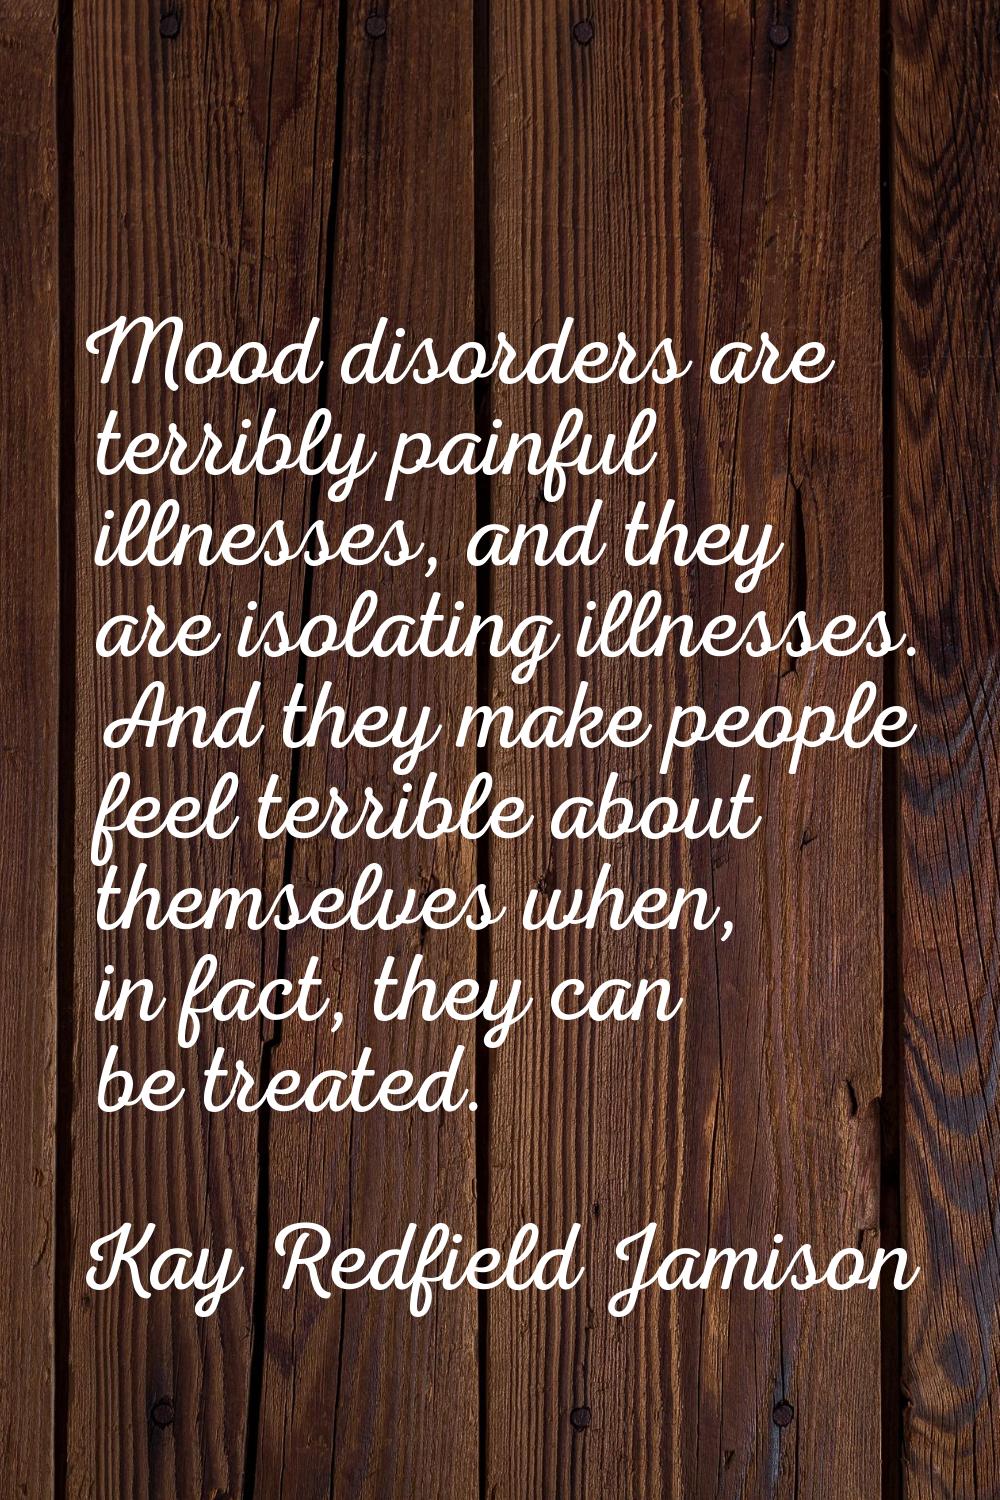 Mood disorders are terribly painful illnesses, and they are isolating illnesses. And they make peop